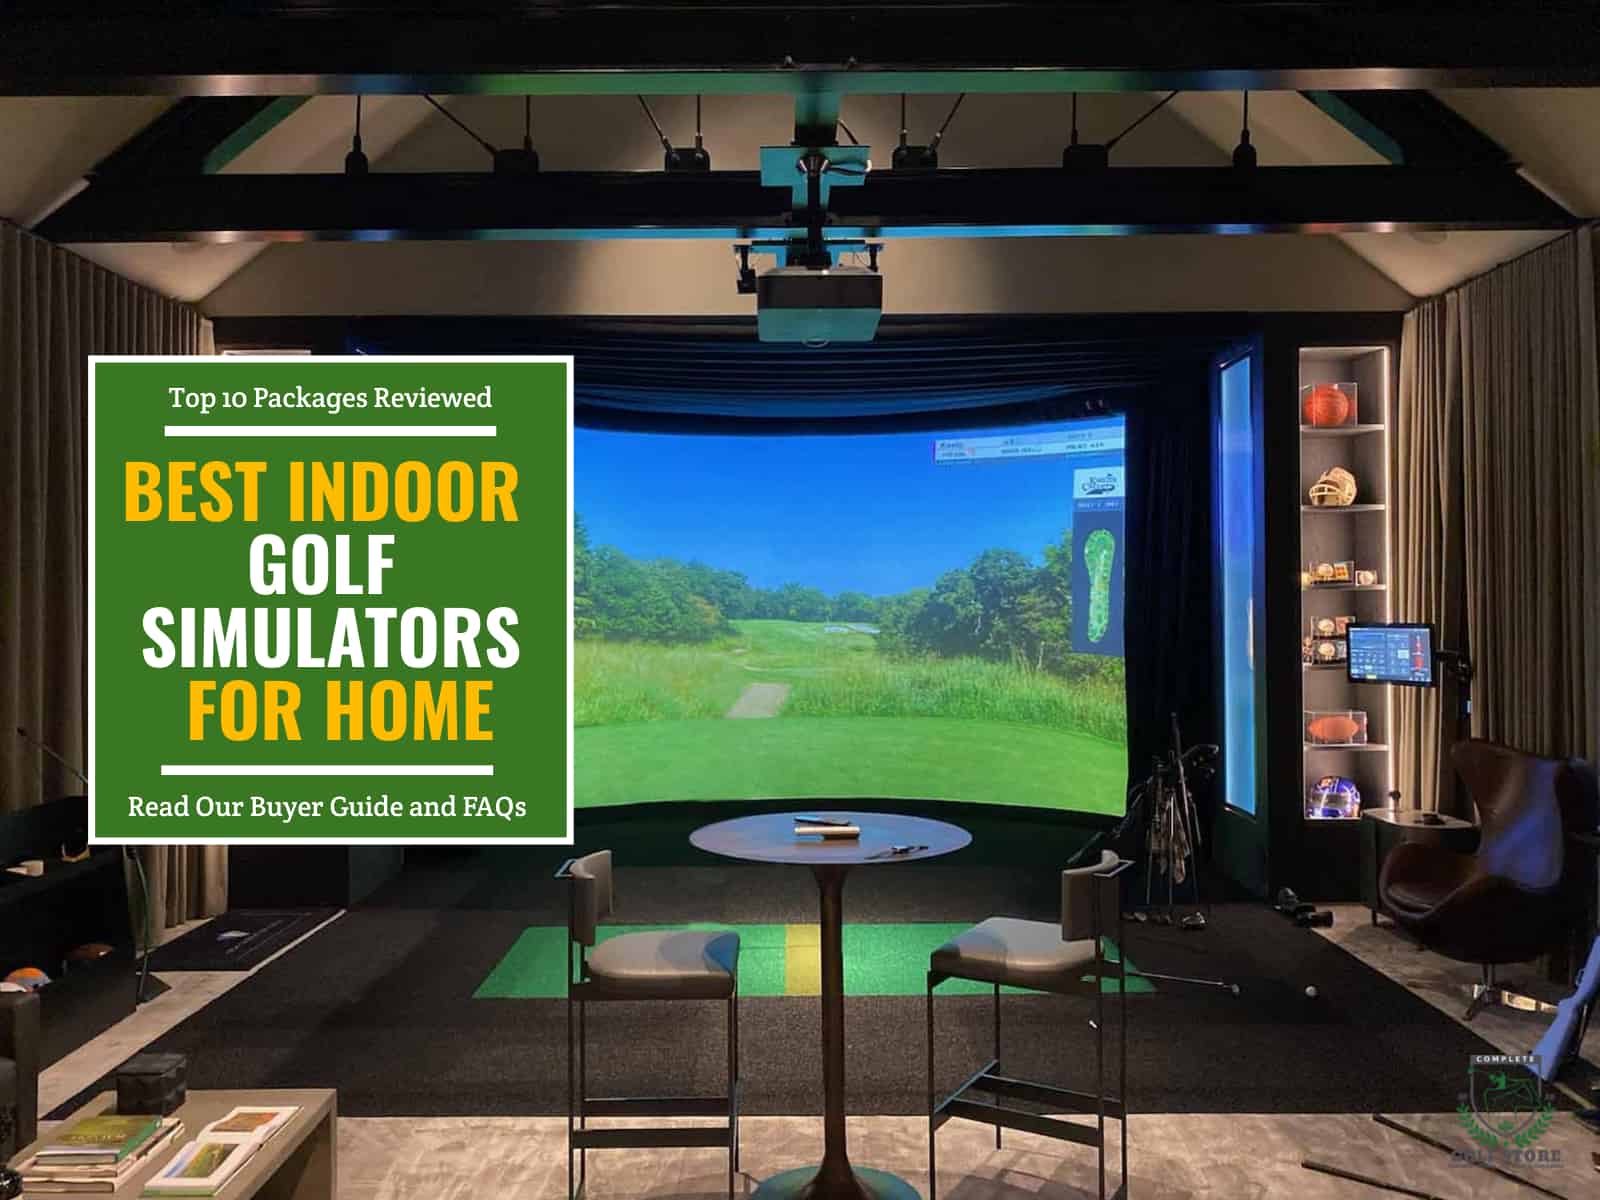 Indoor golf simulator set up of the HD Golf Ultimate Entertainment Package. Green textbox on the left contains the text 